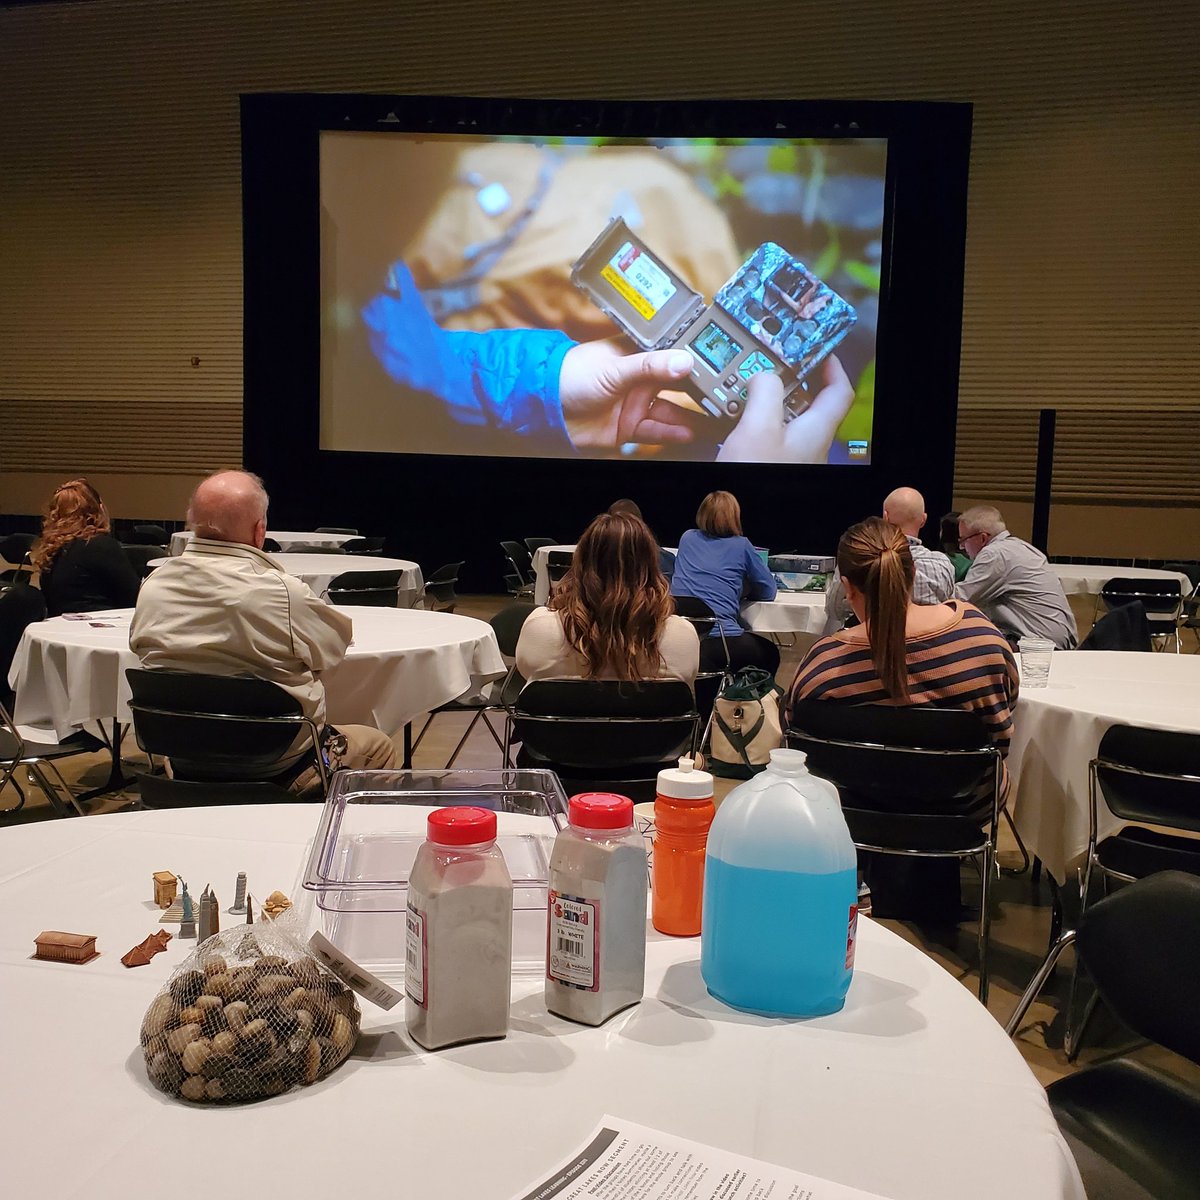 We had a decent turnout for last evening's movie/games night at #MSTA2024 with PBS & HHMI. #WildHope #GreatLakesNow

Hope to see y'all at today's Science of Salamanders presentation in Room 101 at 1pm.